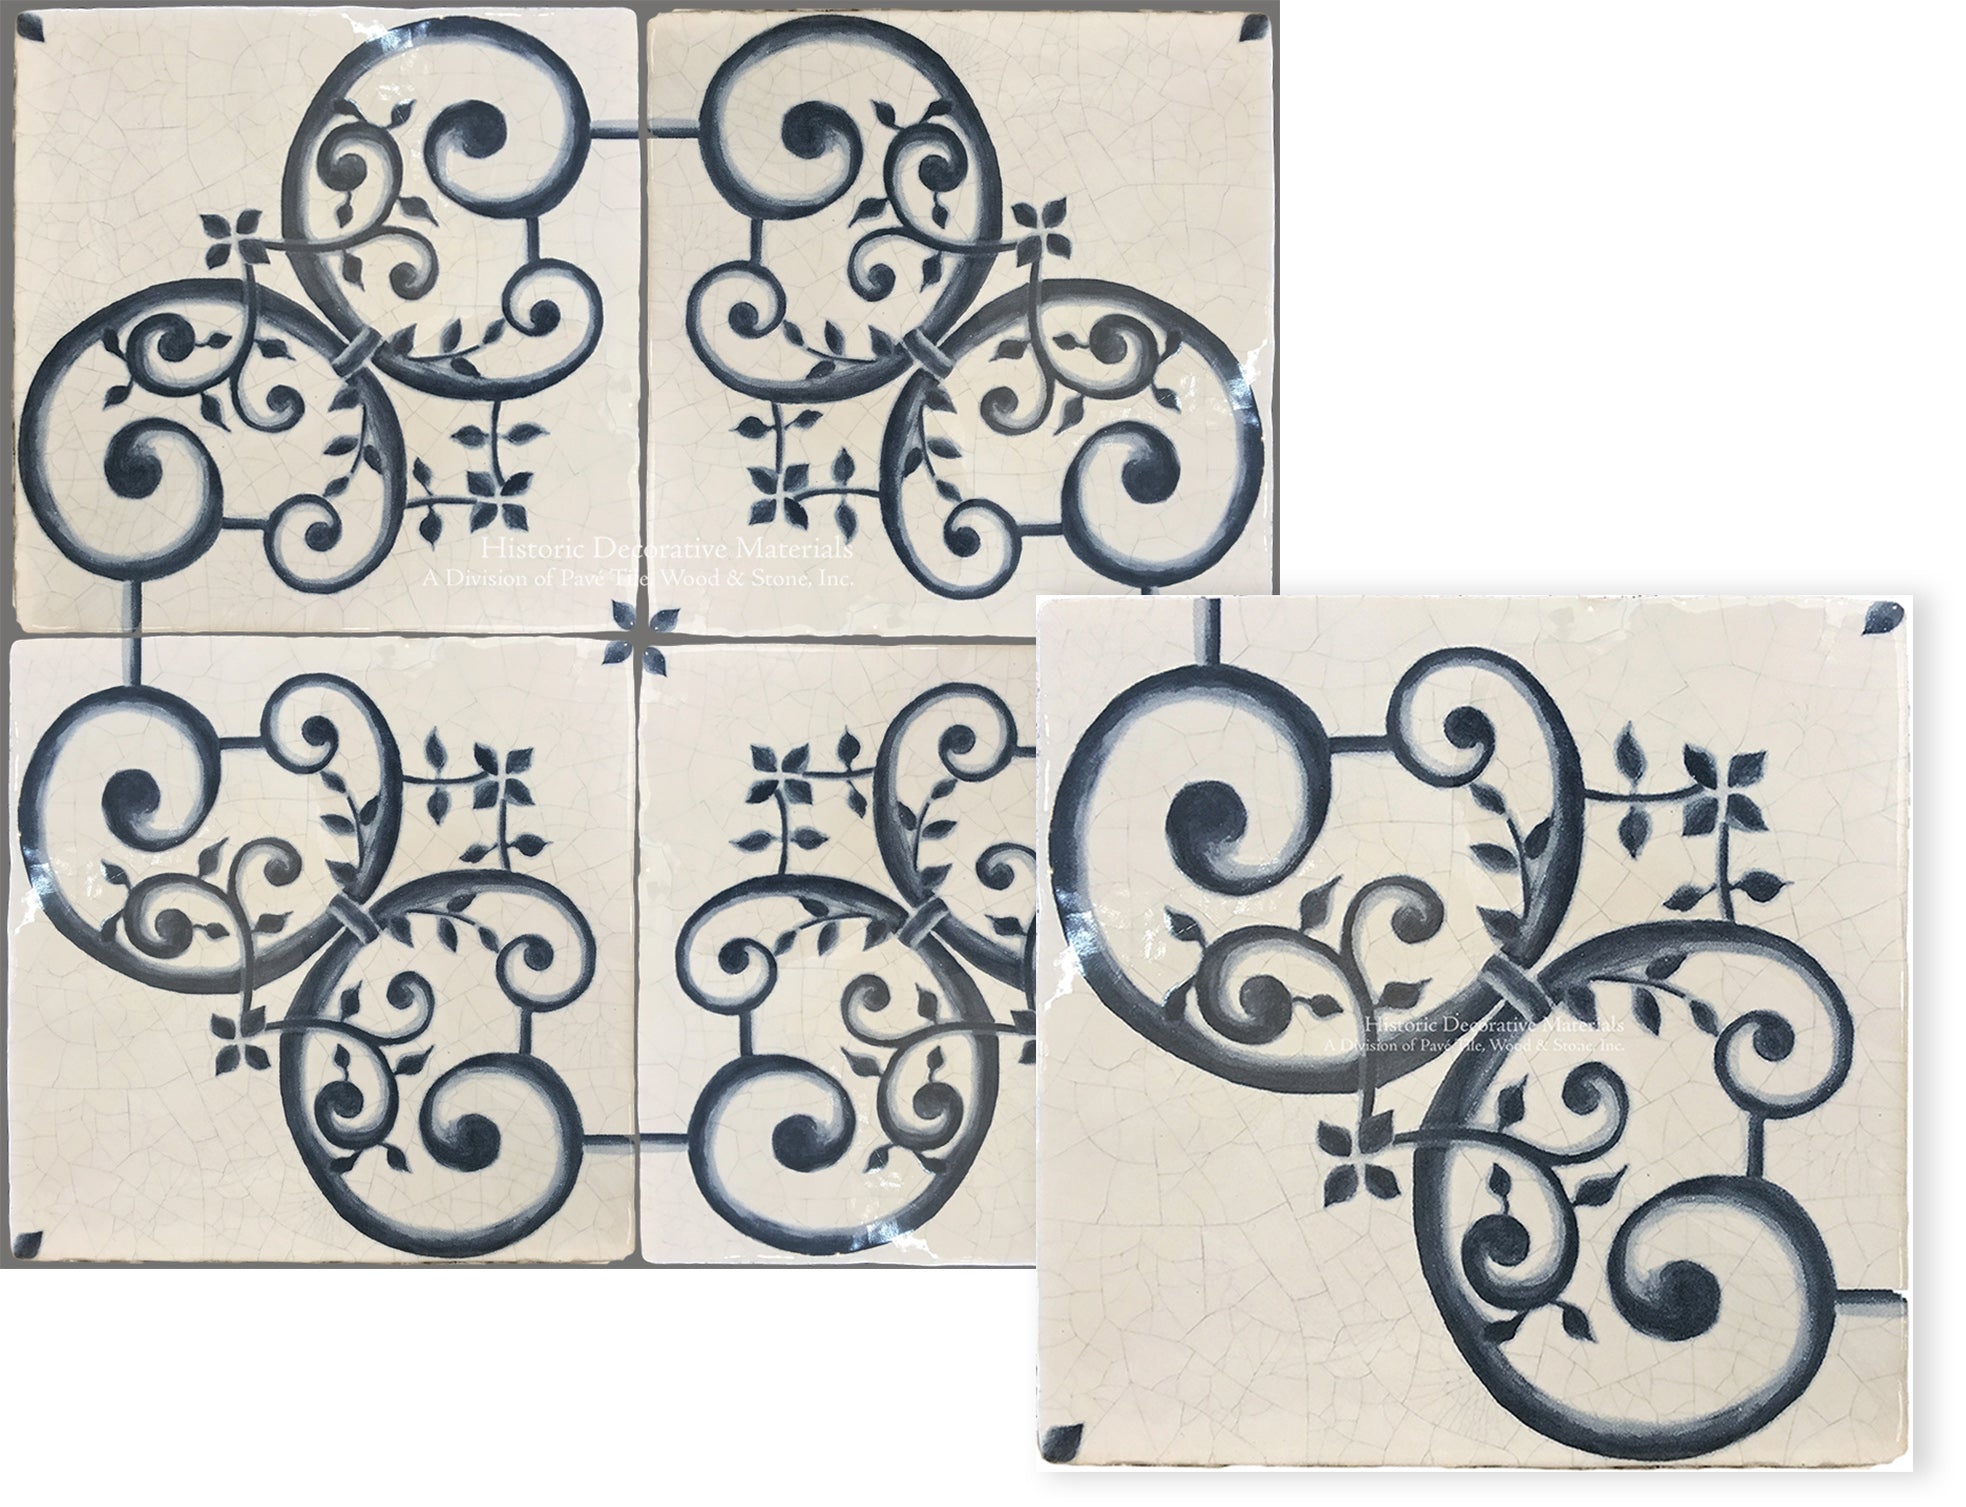 Historic Decorative Hand Painted Wall Tile that is blue and white decorative wall tile for kitchen backsplash, fireplace surround and bathroom walls for interior designs that love old world, farmhouse and luxury interiors